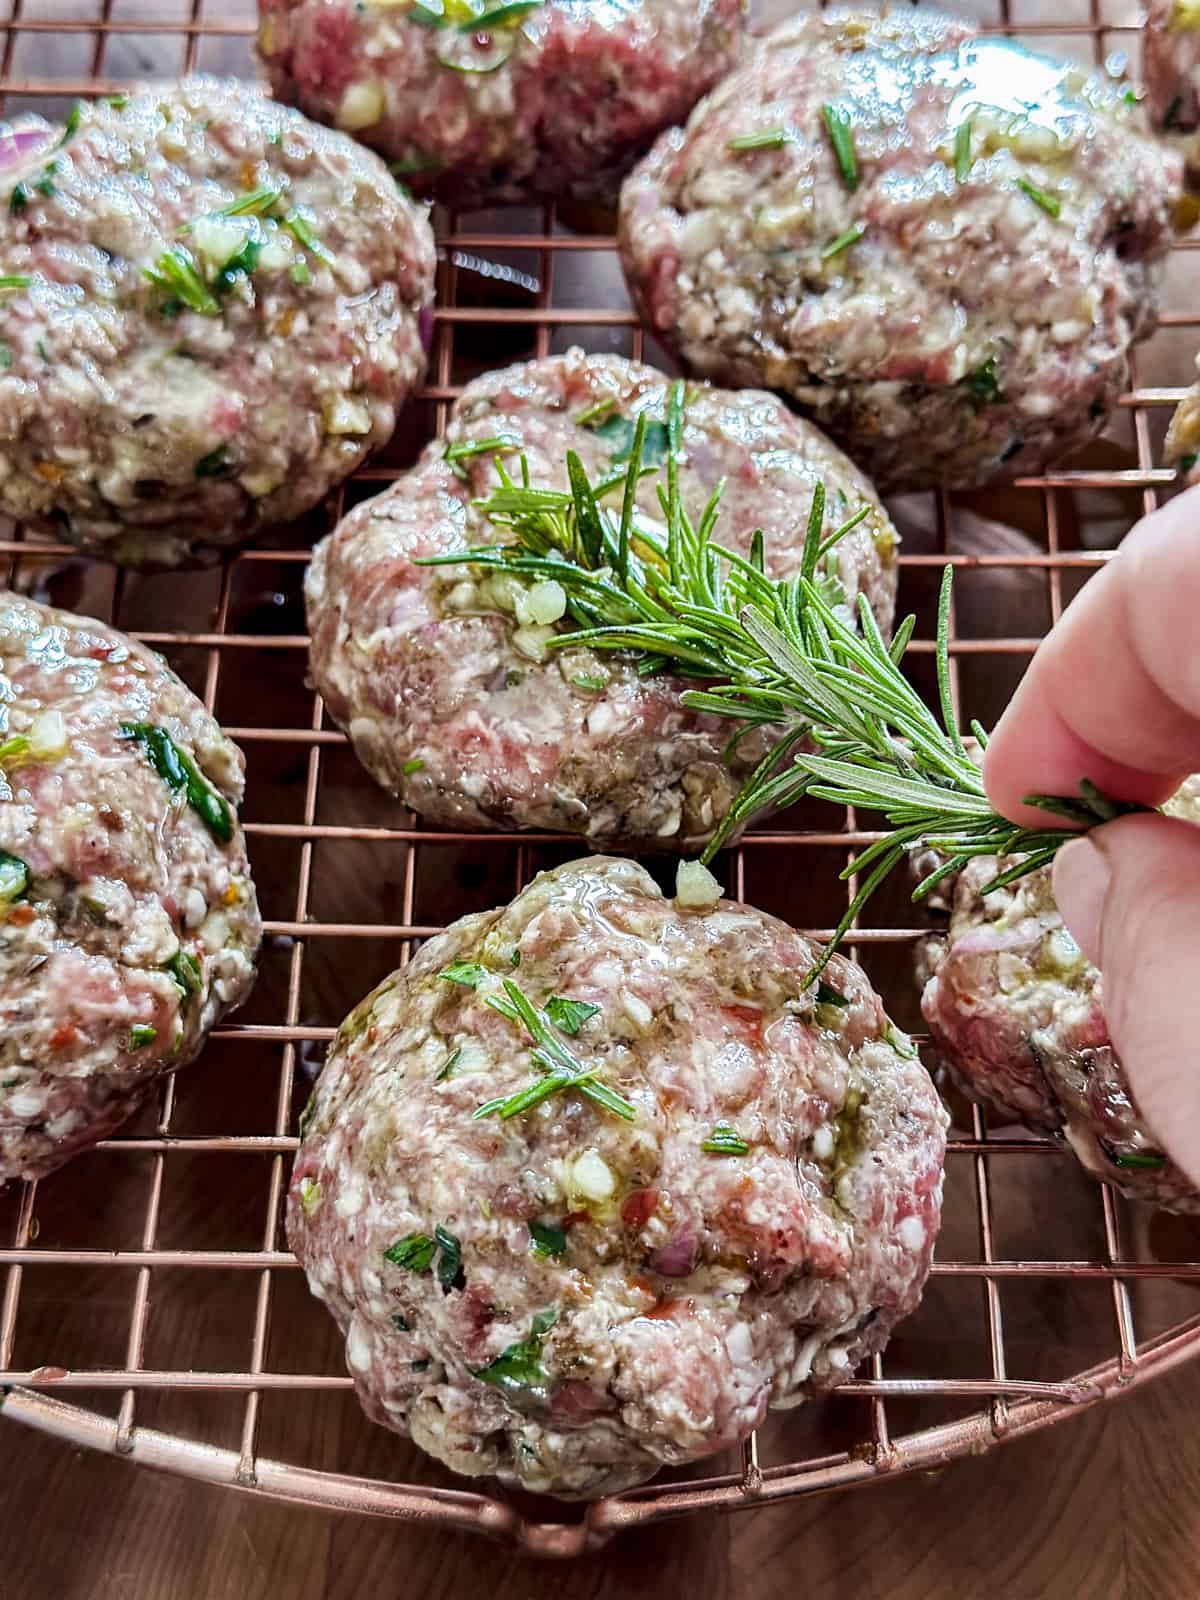 A hand holding a rosemary sprigs brushing olive oil on lamb burgers on a wire rack.